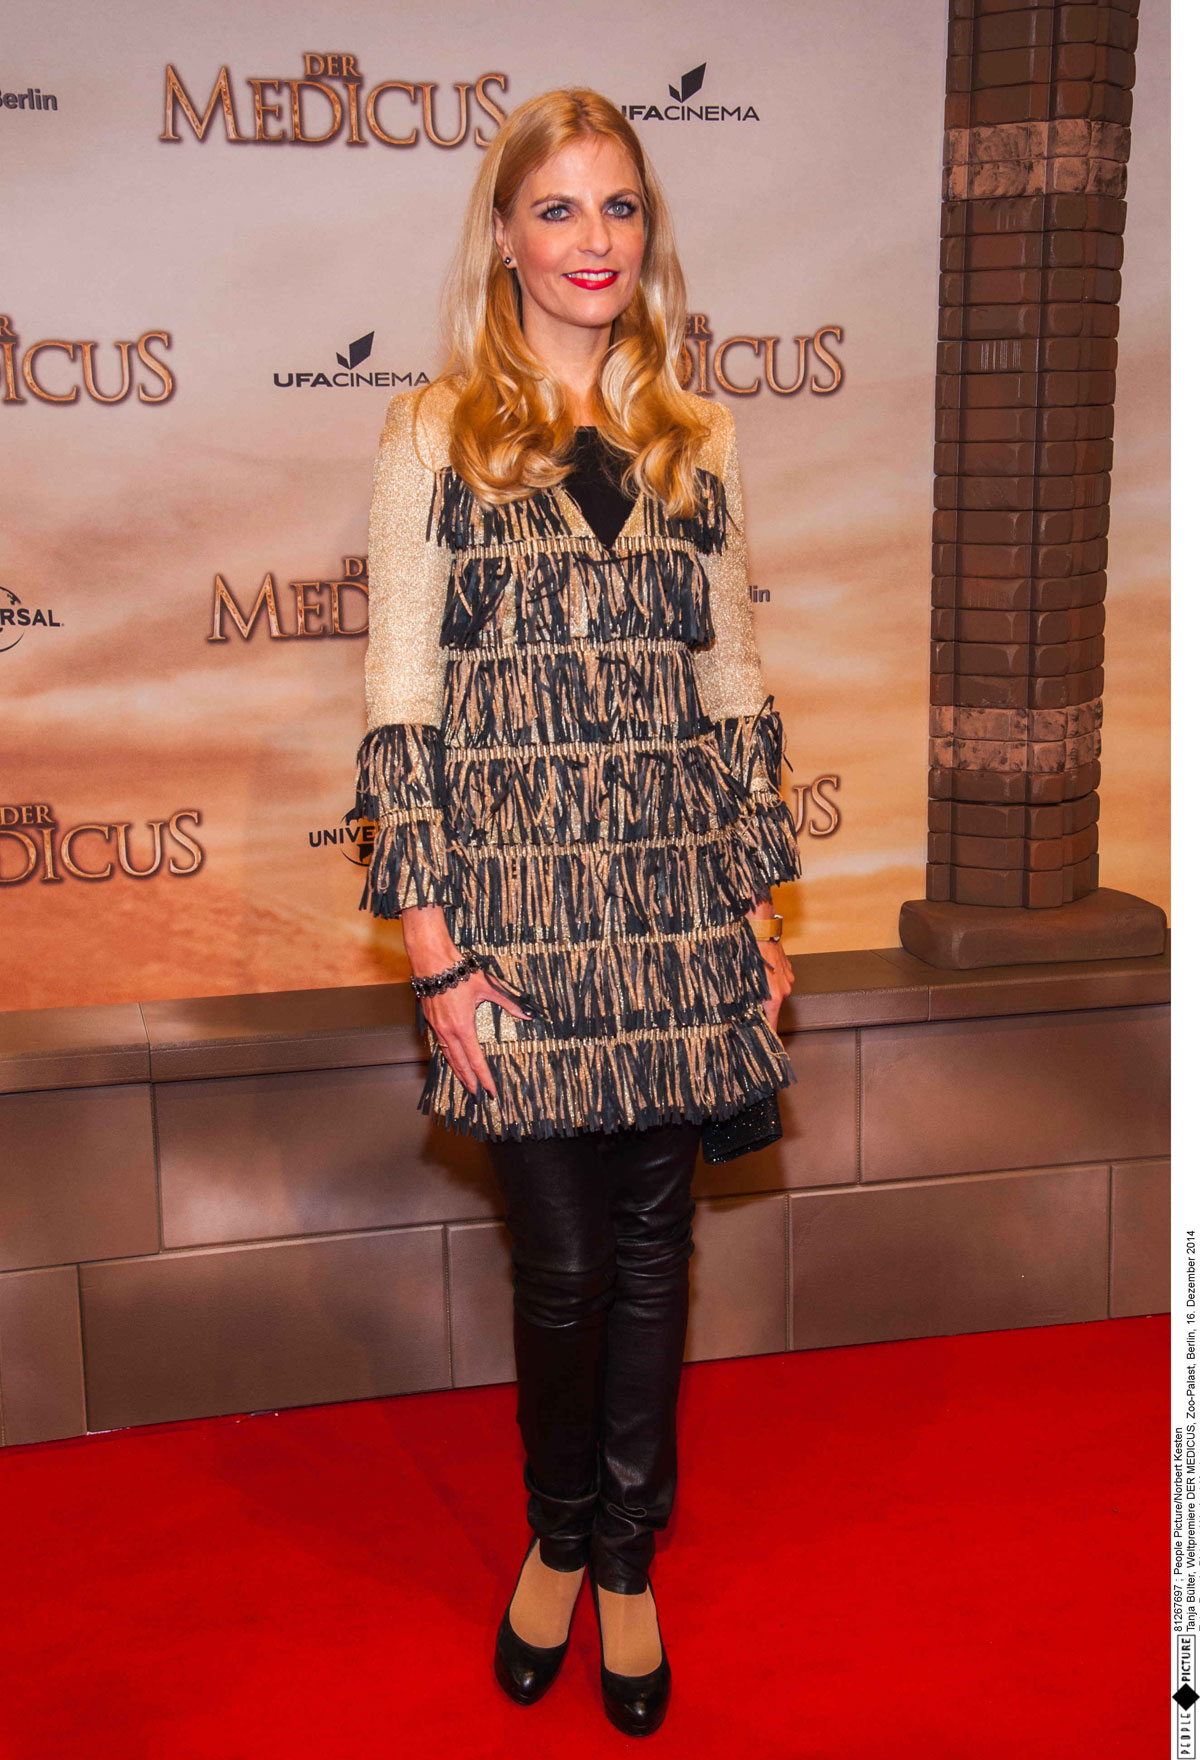 Tanja Bulter attends World premiere of the feature film THE MEDICUS